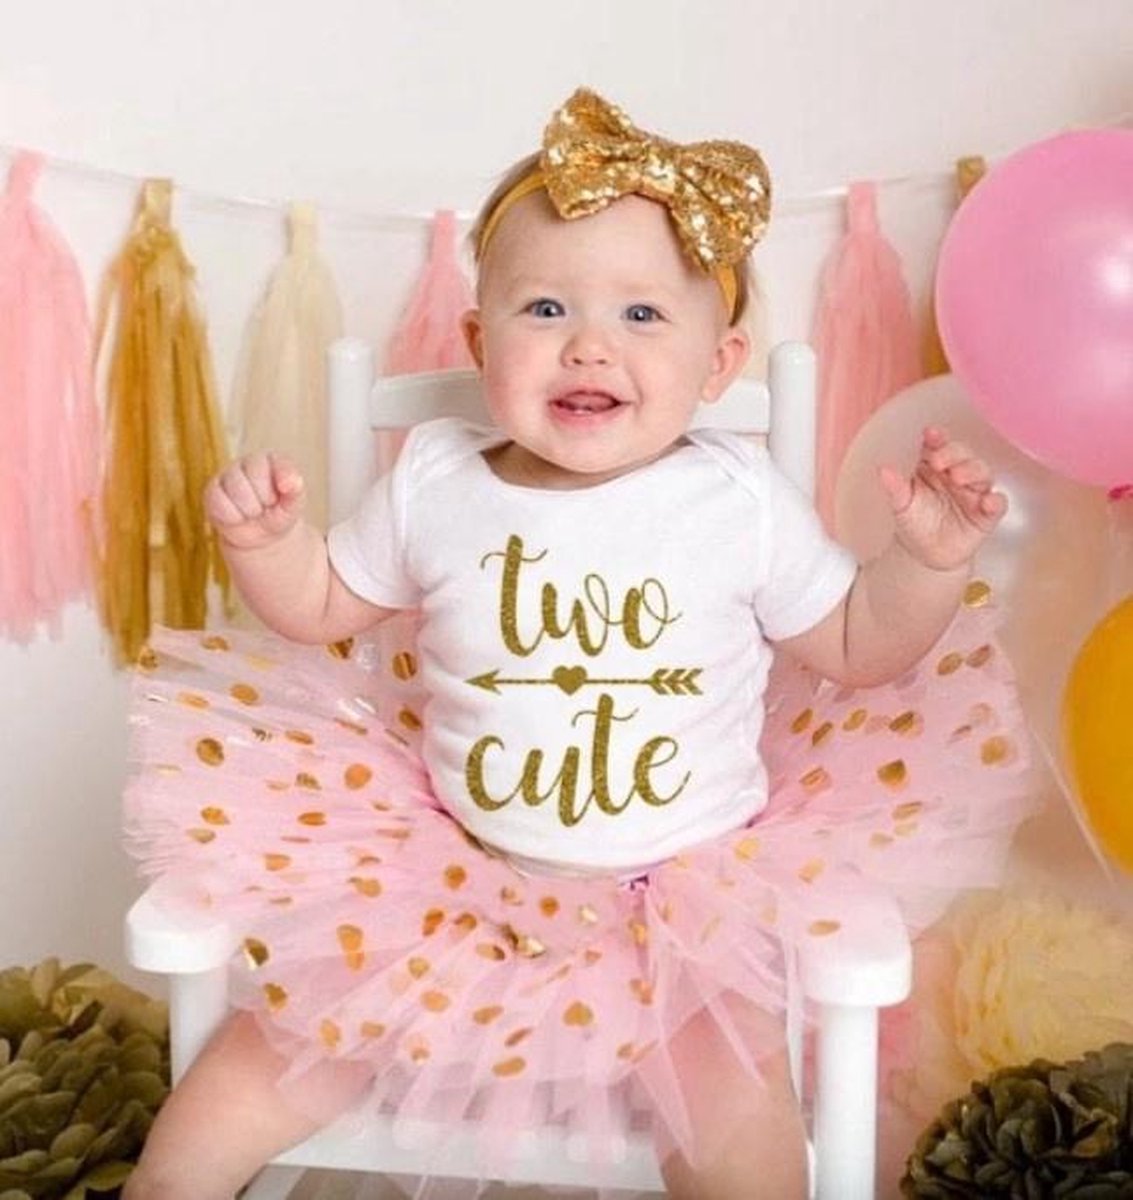 Verjaardag Outfit // Shabby Chic // Shabby Chic Outfit // Cake Smash Outfit // Baby Meisje Eerste Verjaardag // Eerste Verjaardag Outfit Kleding Meisjeskleding Babykleding voor meisjes Kledingsets 